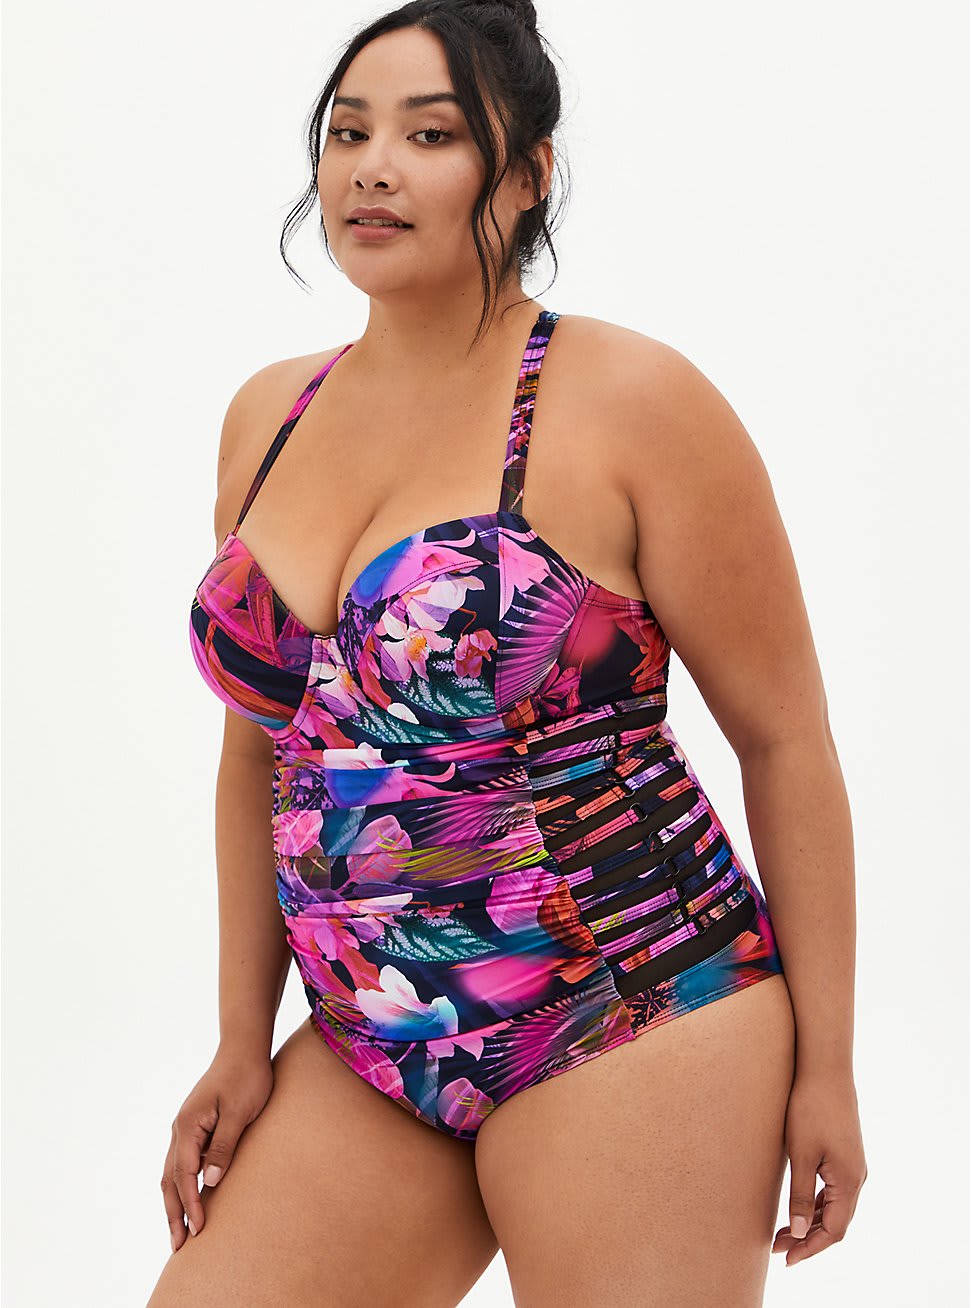 best plus-size bathing suits and swimwear of 2021 - TODAY